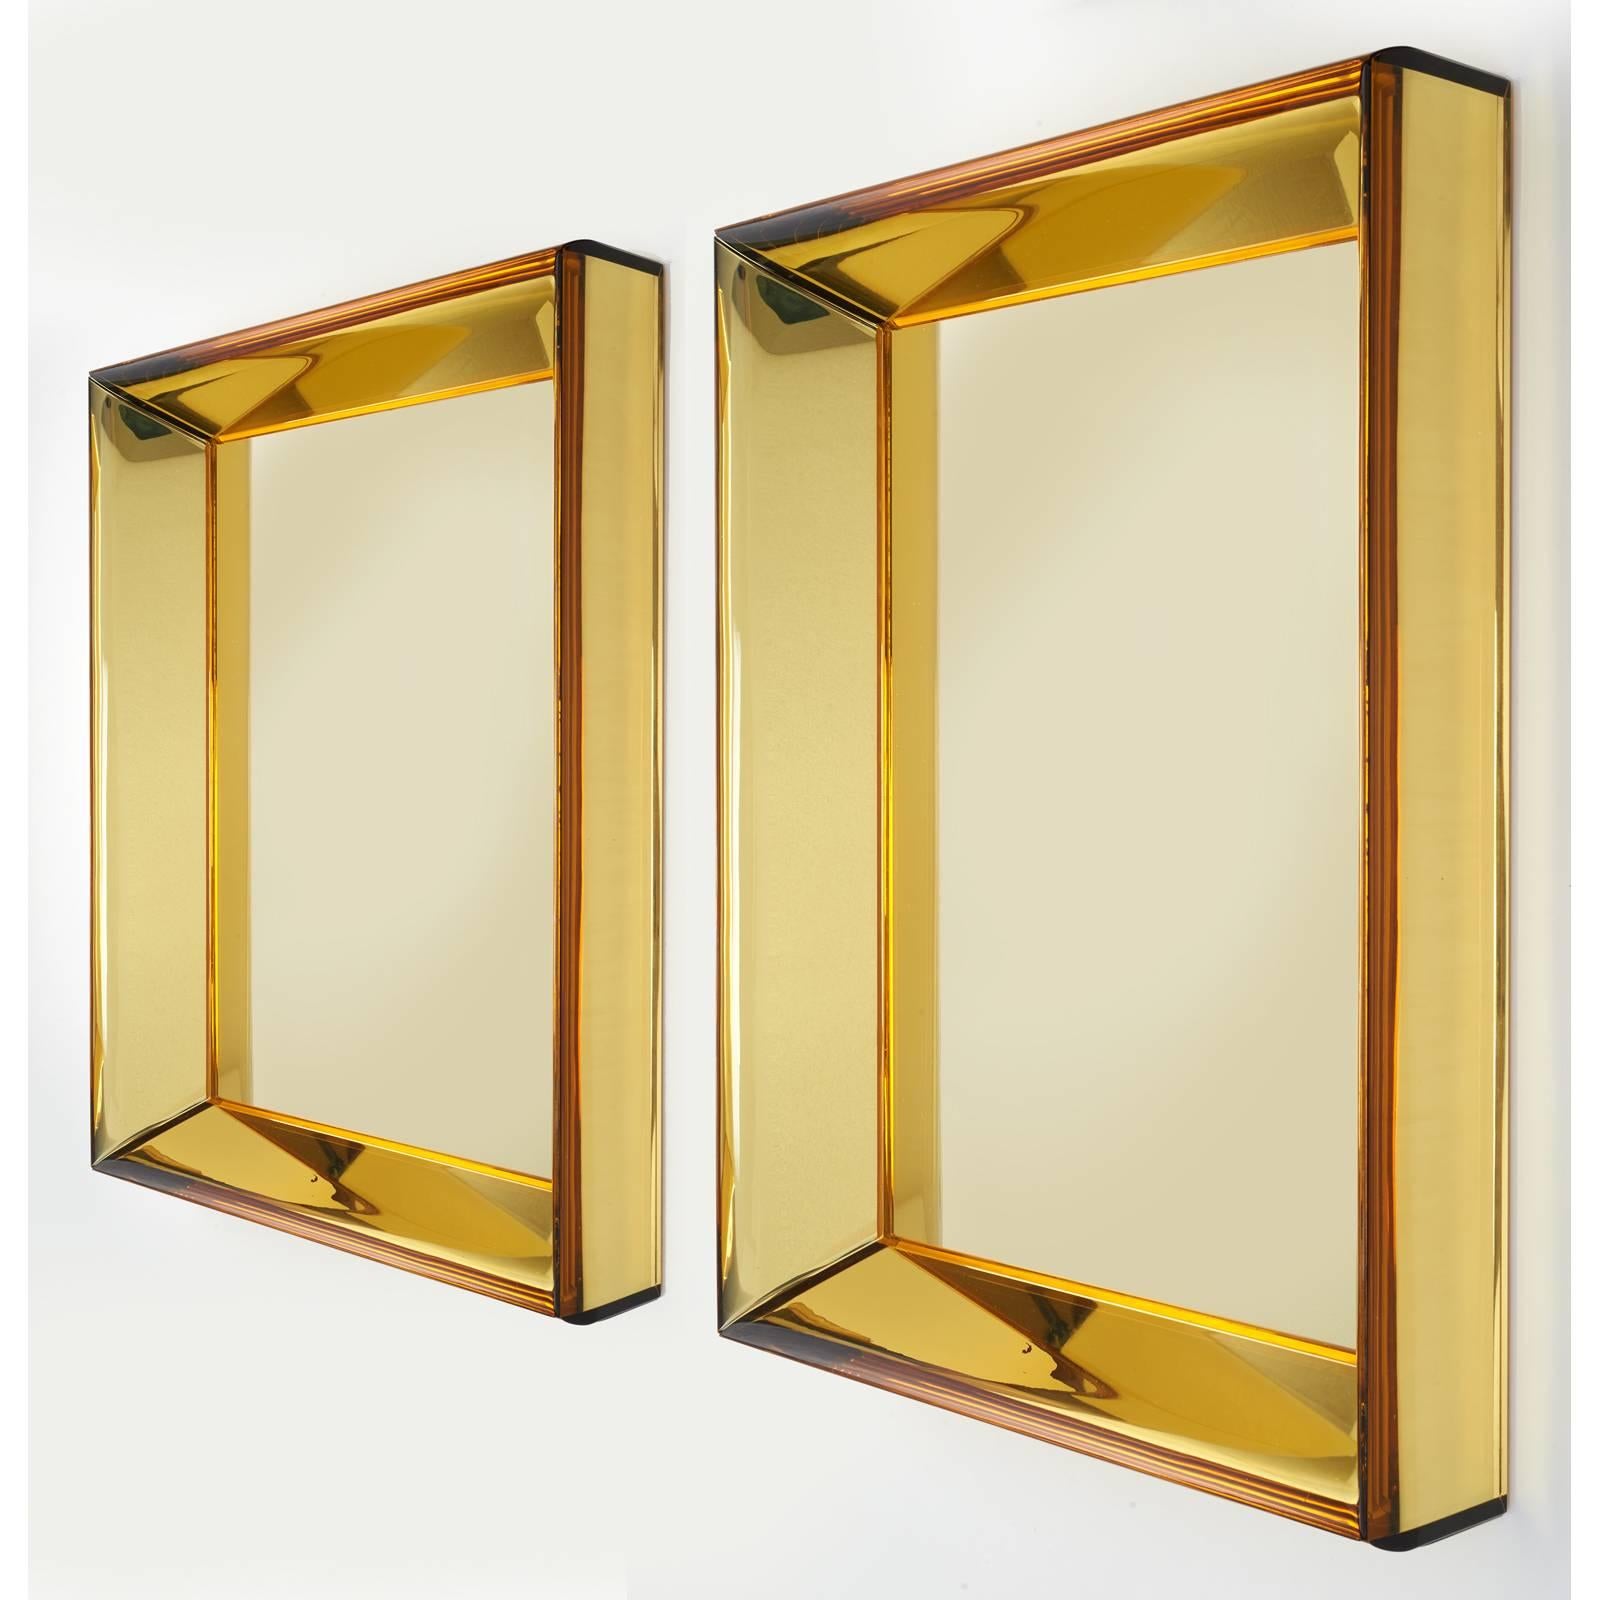 Roberto Rida (b. 1943).
A magnificent mirror by Roberto Rida, produced using richly colored vintage Italian yellow mirrored and ground glass from the 1950s.
Dimensions: 25 W x 33 H x 5 D.
